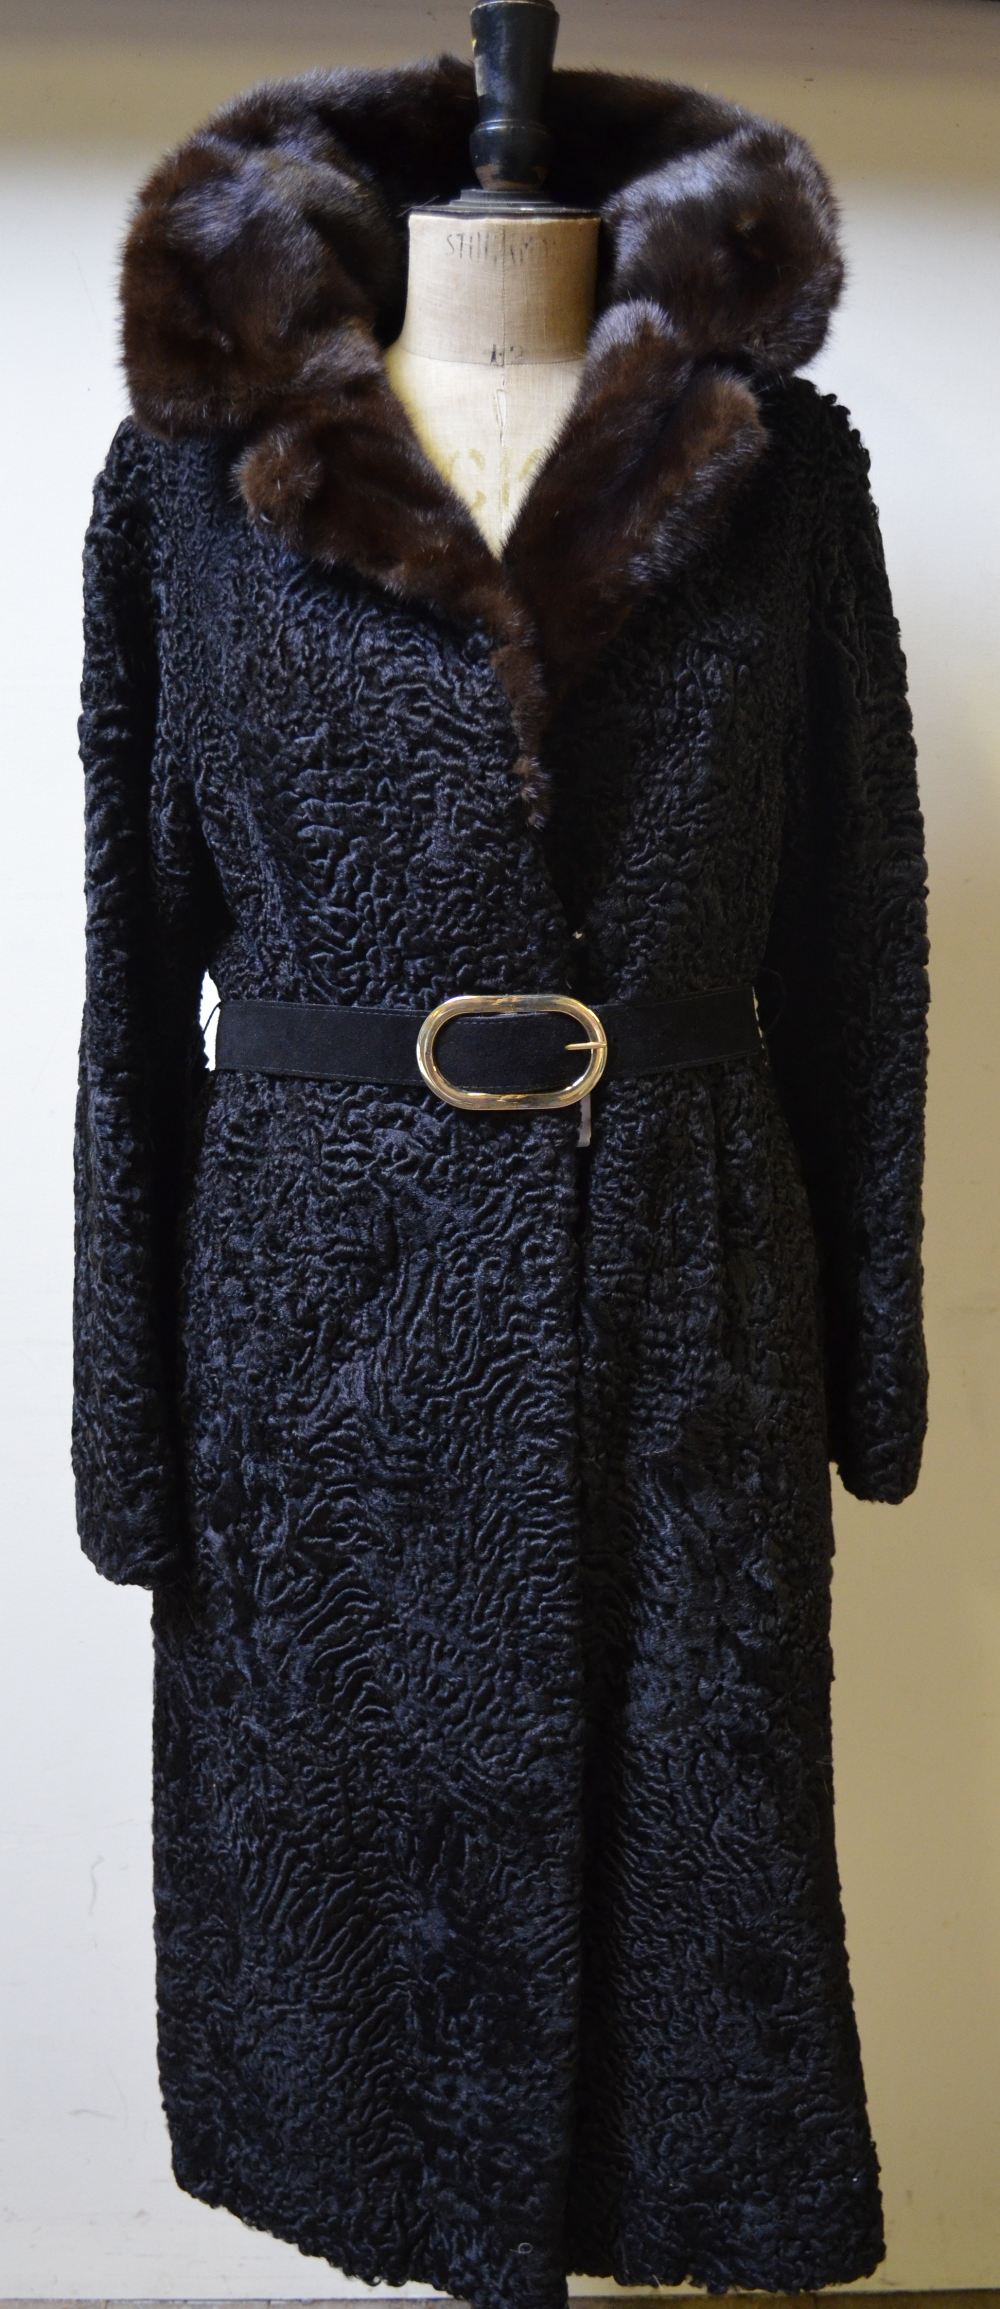 Black Persian lamb belted full-length coat with brown mink collar by 'Kay' Buchanan St., Glasgow